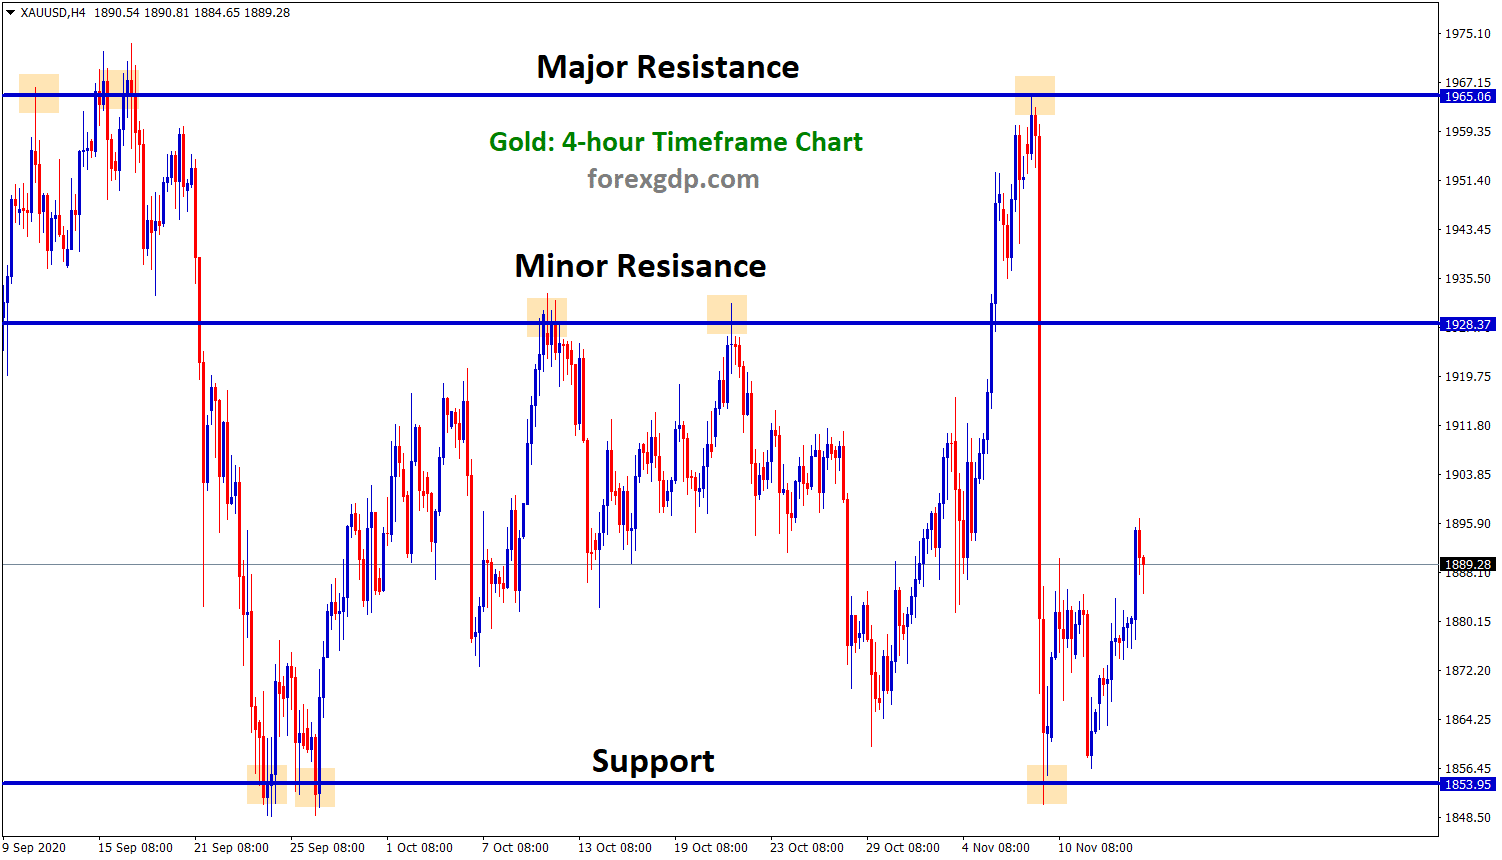 XAUUSDH4 gold minor and major resistance support bounce back